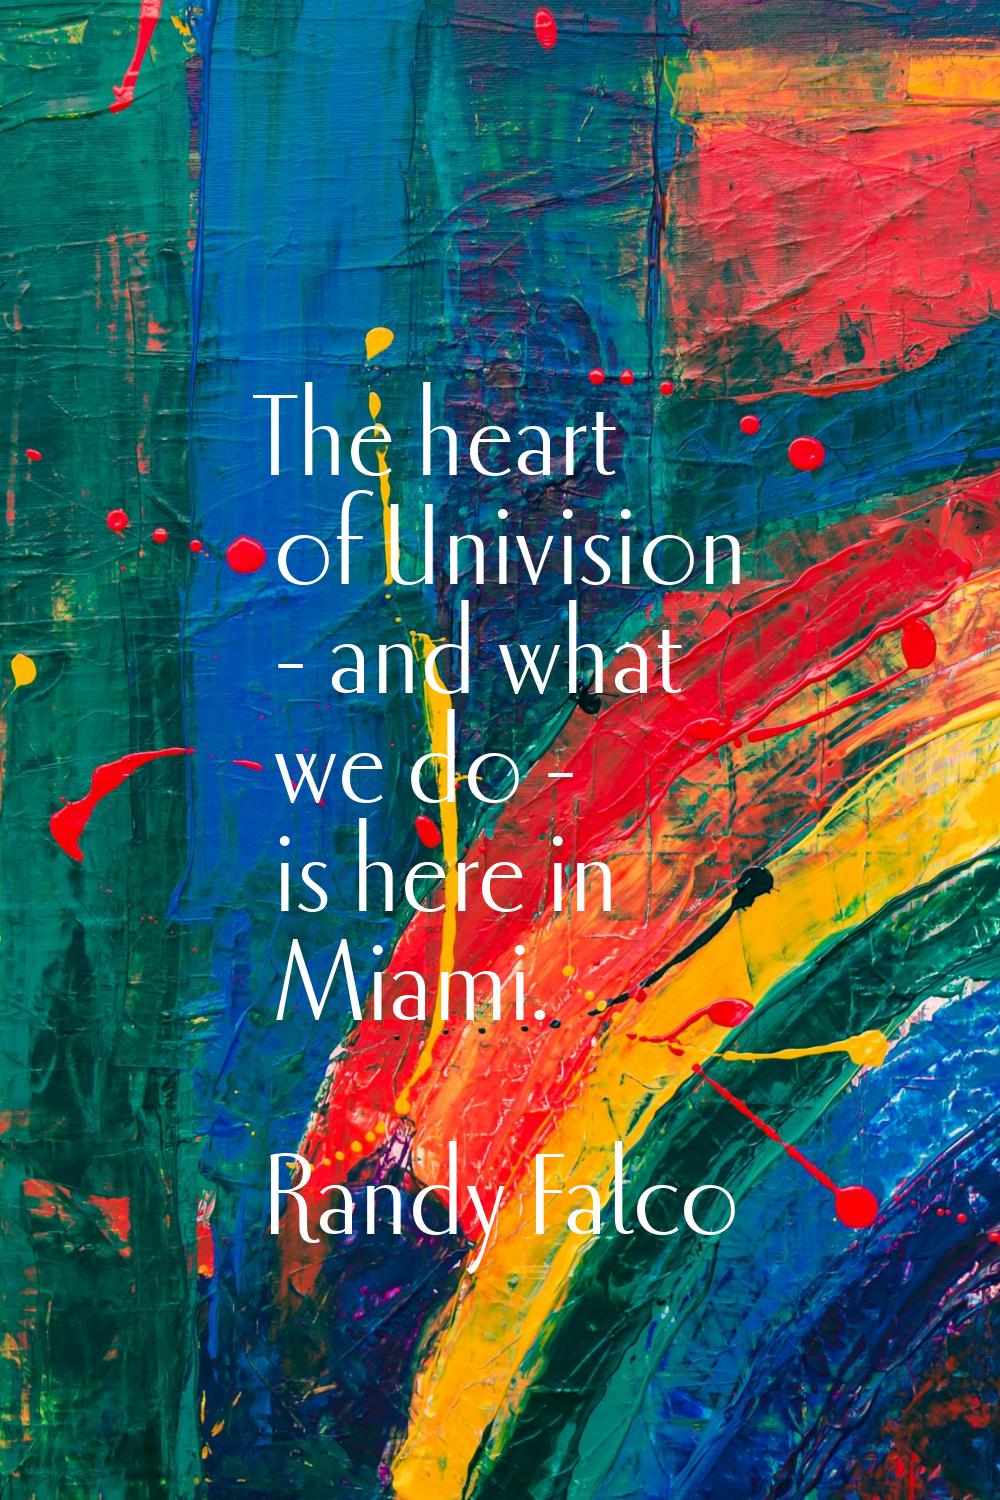 The heart of Univision - and what we do - is here in Miami.